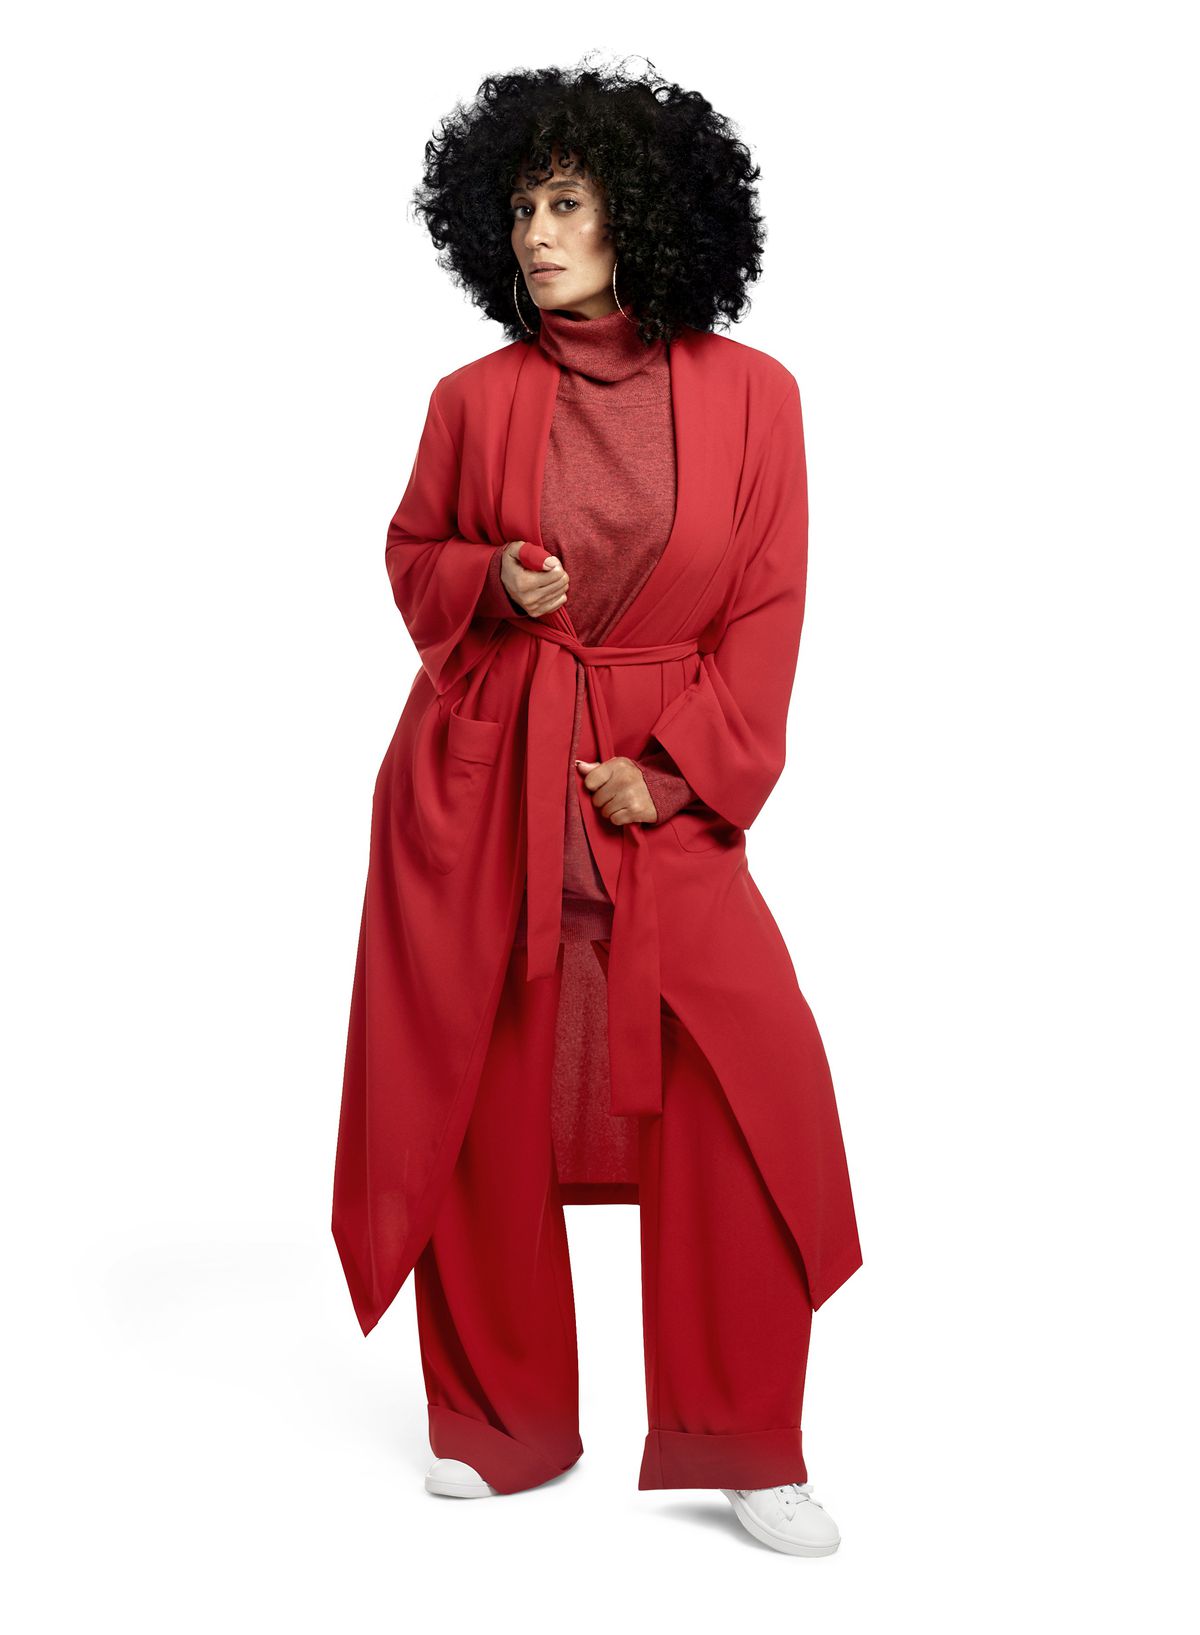 Tracee Ellis Ross in Tracee Ellis Ross x JC Penny red wrap coat and high waisted pants 